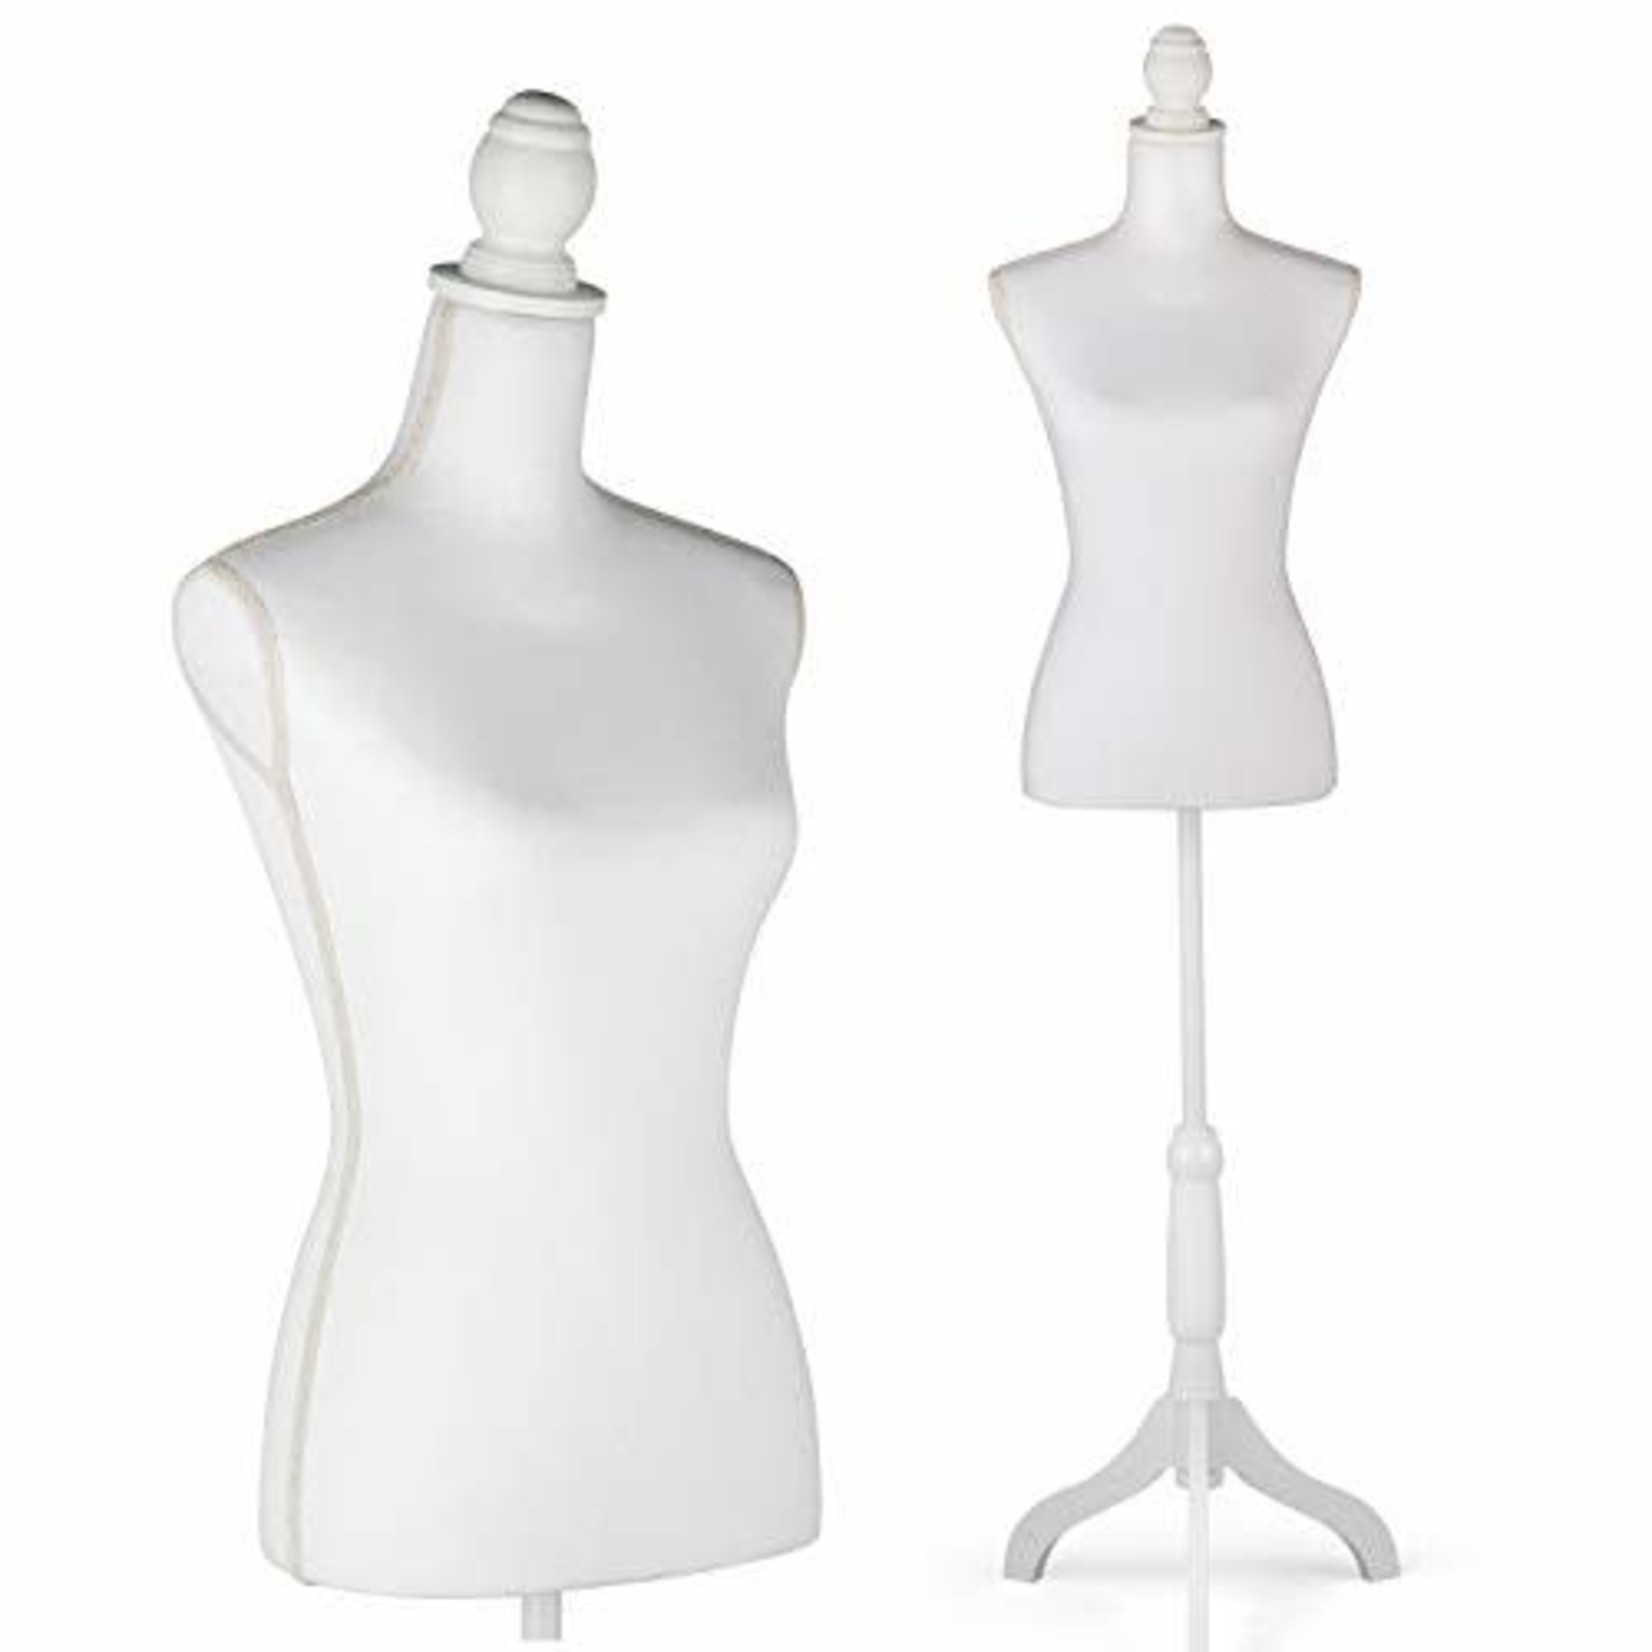 HYNAWIN Female Dress Form Mannequin Torso Adjustable Height Mannequin Body with Tripod Stand for Clothing Dress Jewelry Display White